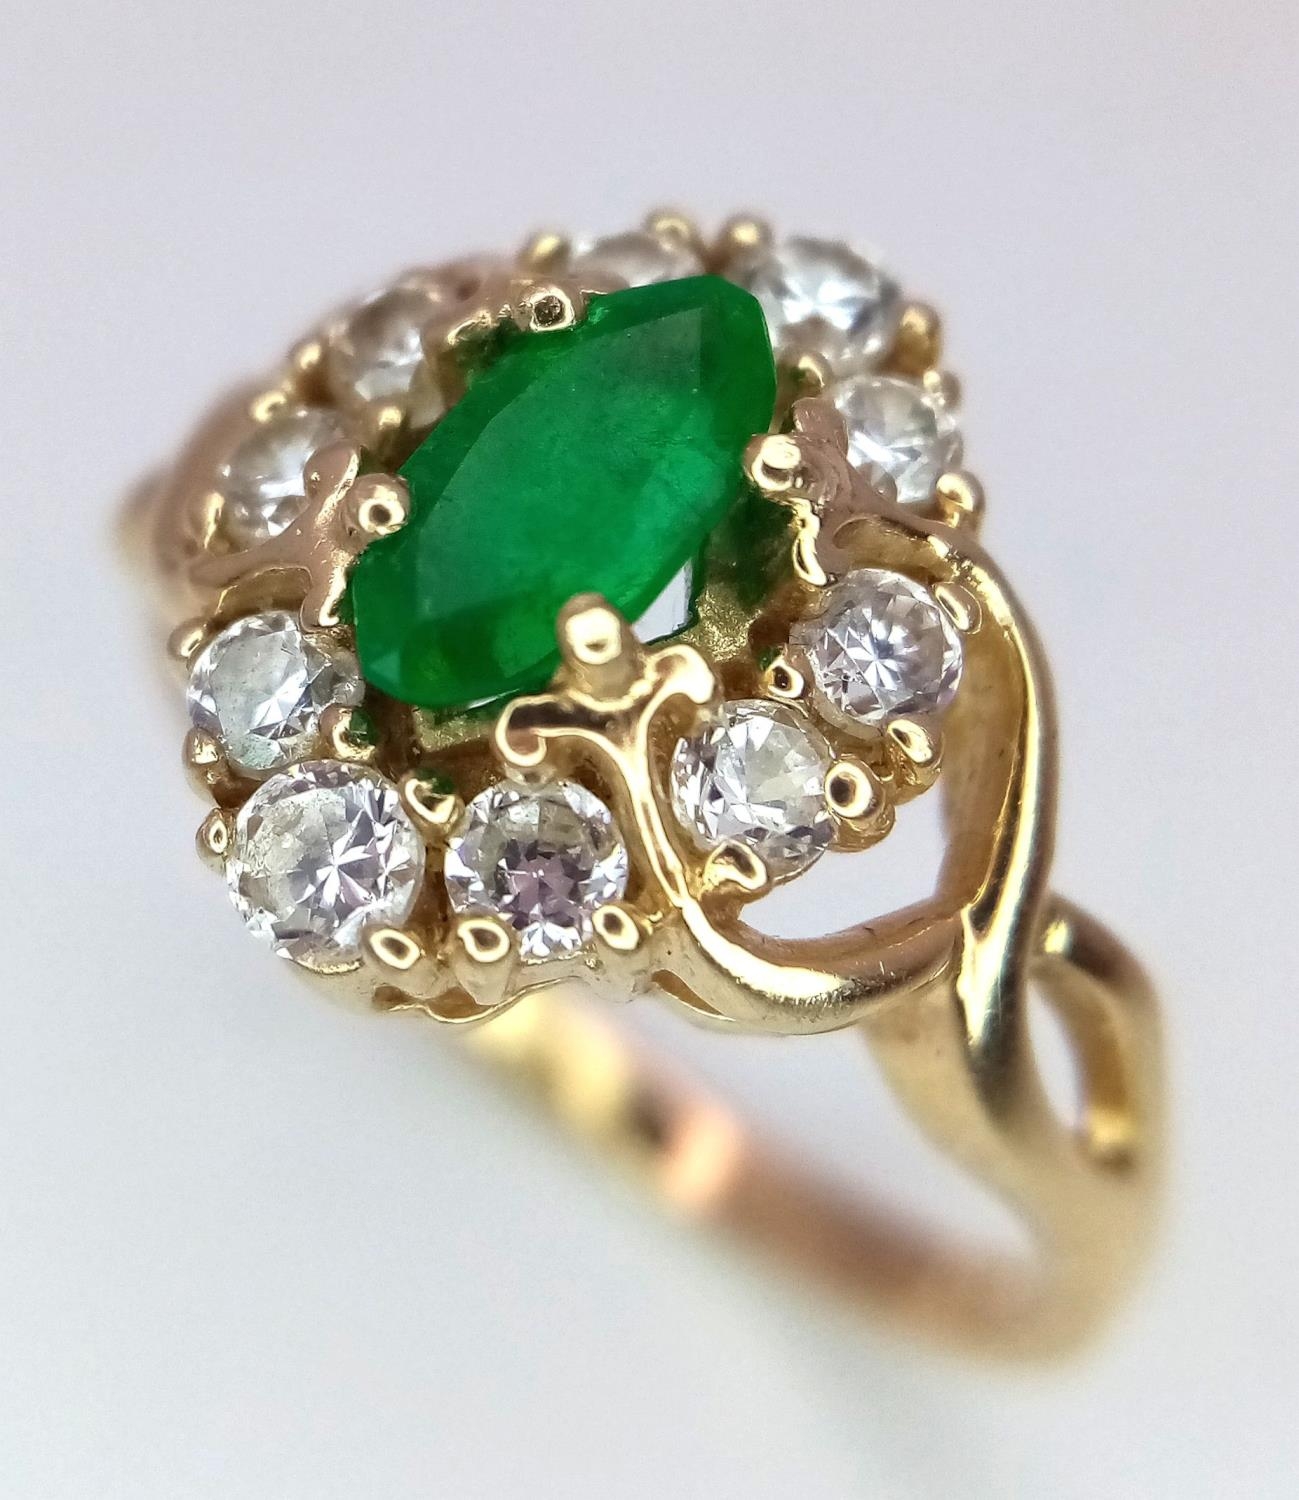 A 14K Yellow Gold Emerald and White Stone Ring. 1.2ct emerald. Size O, 3.34g total weight. - Image 3 of 5